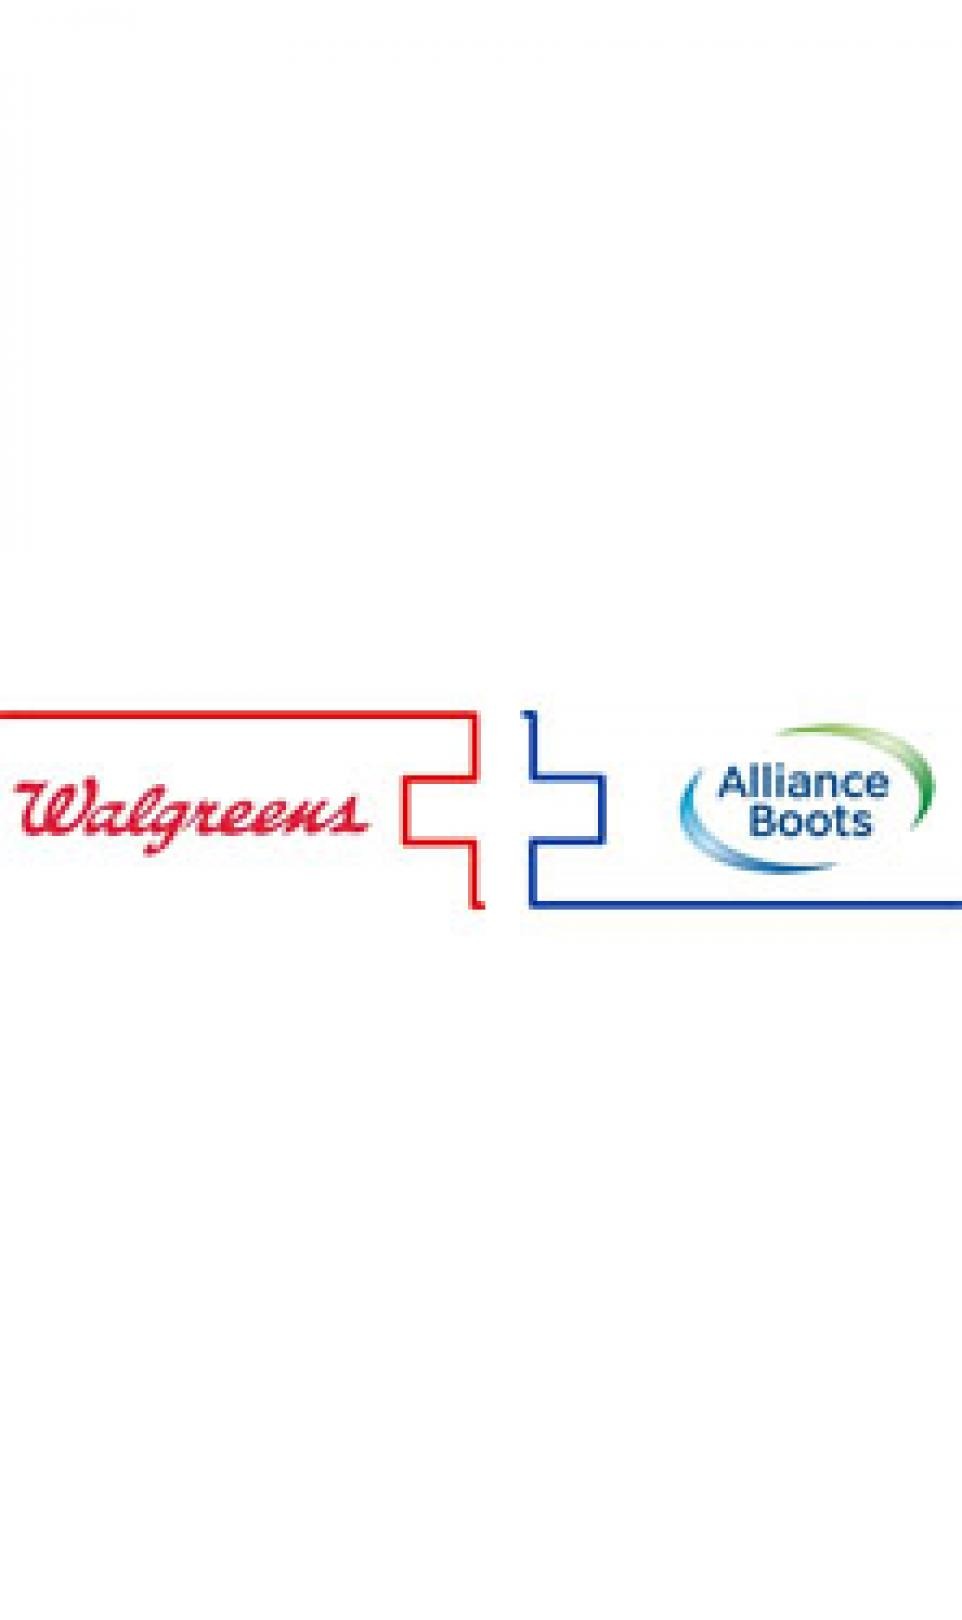 The red Walgreens logo and the blue Alliance Boots logo, pictured side-by-side on a white background